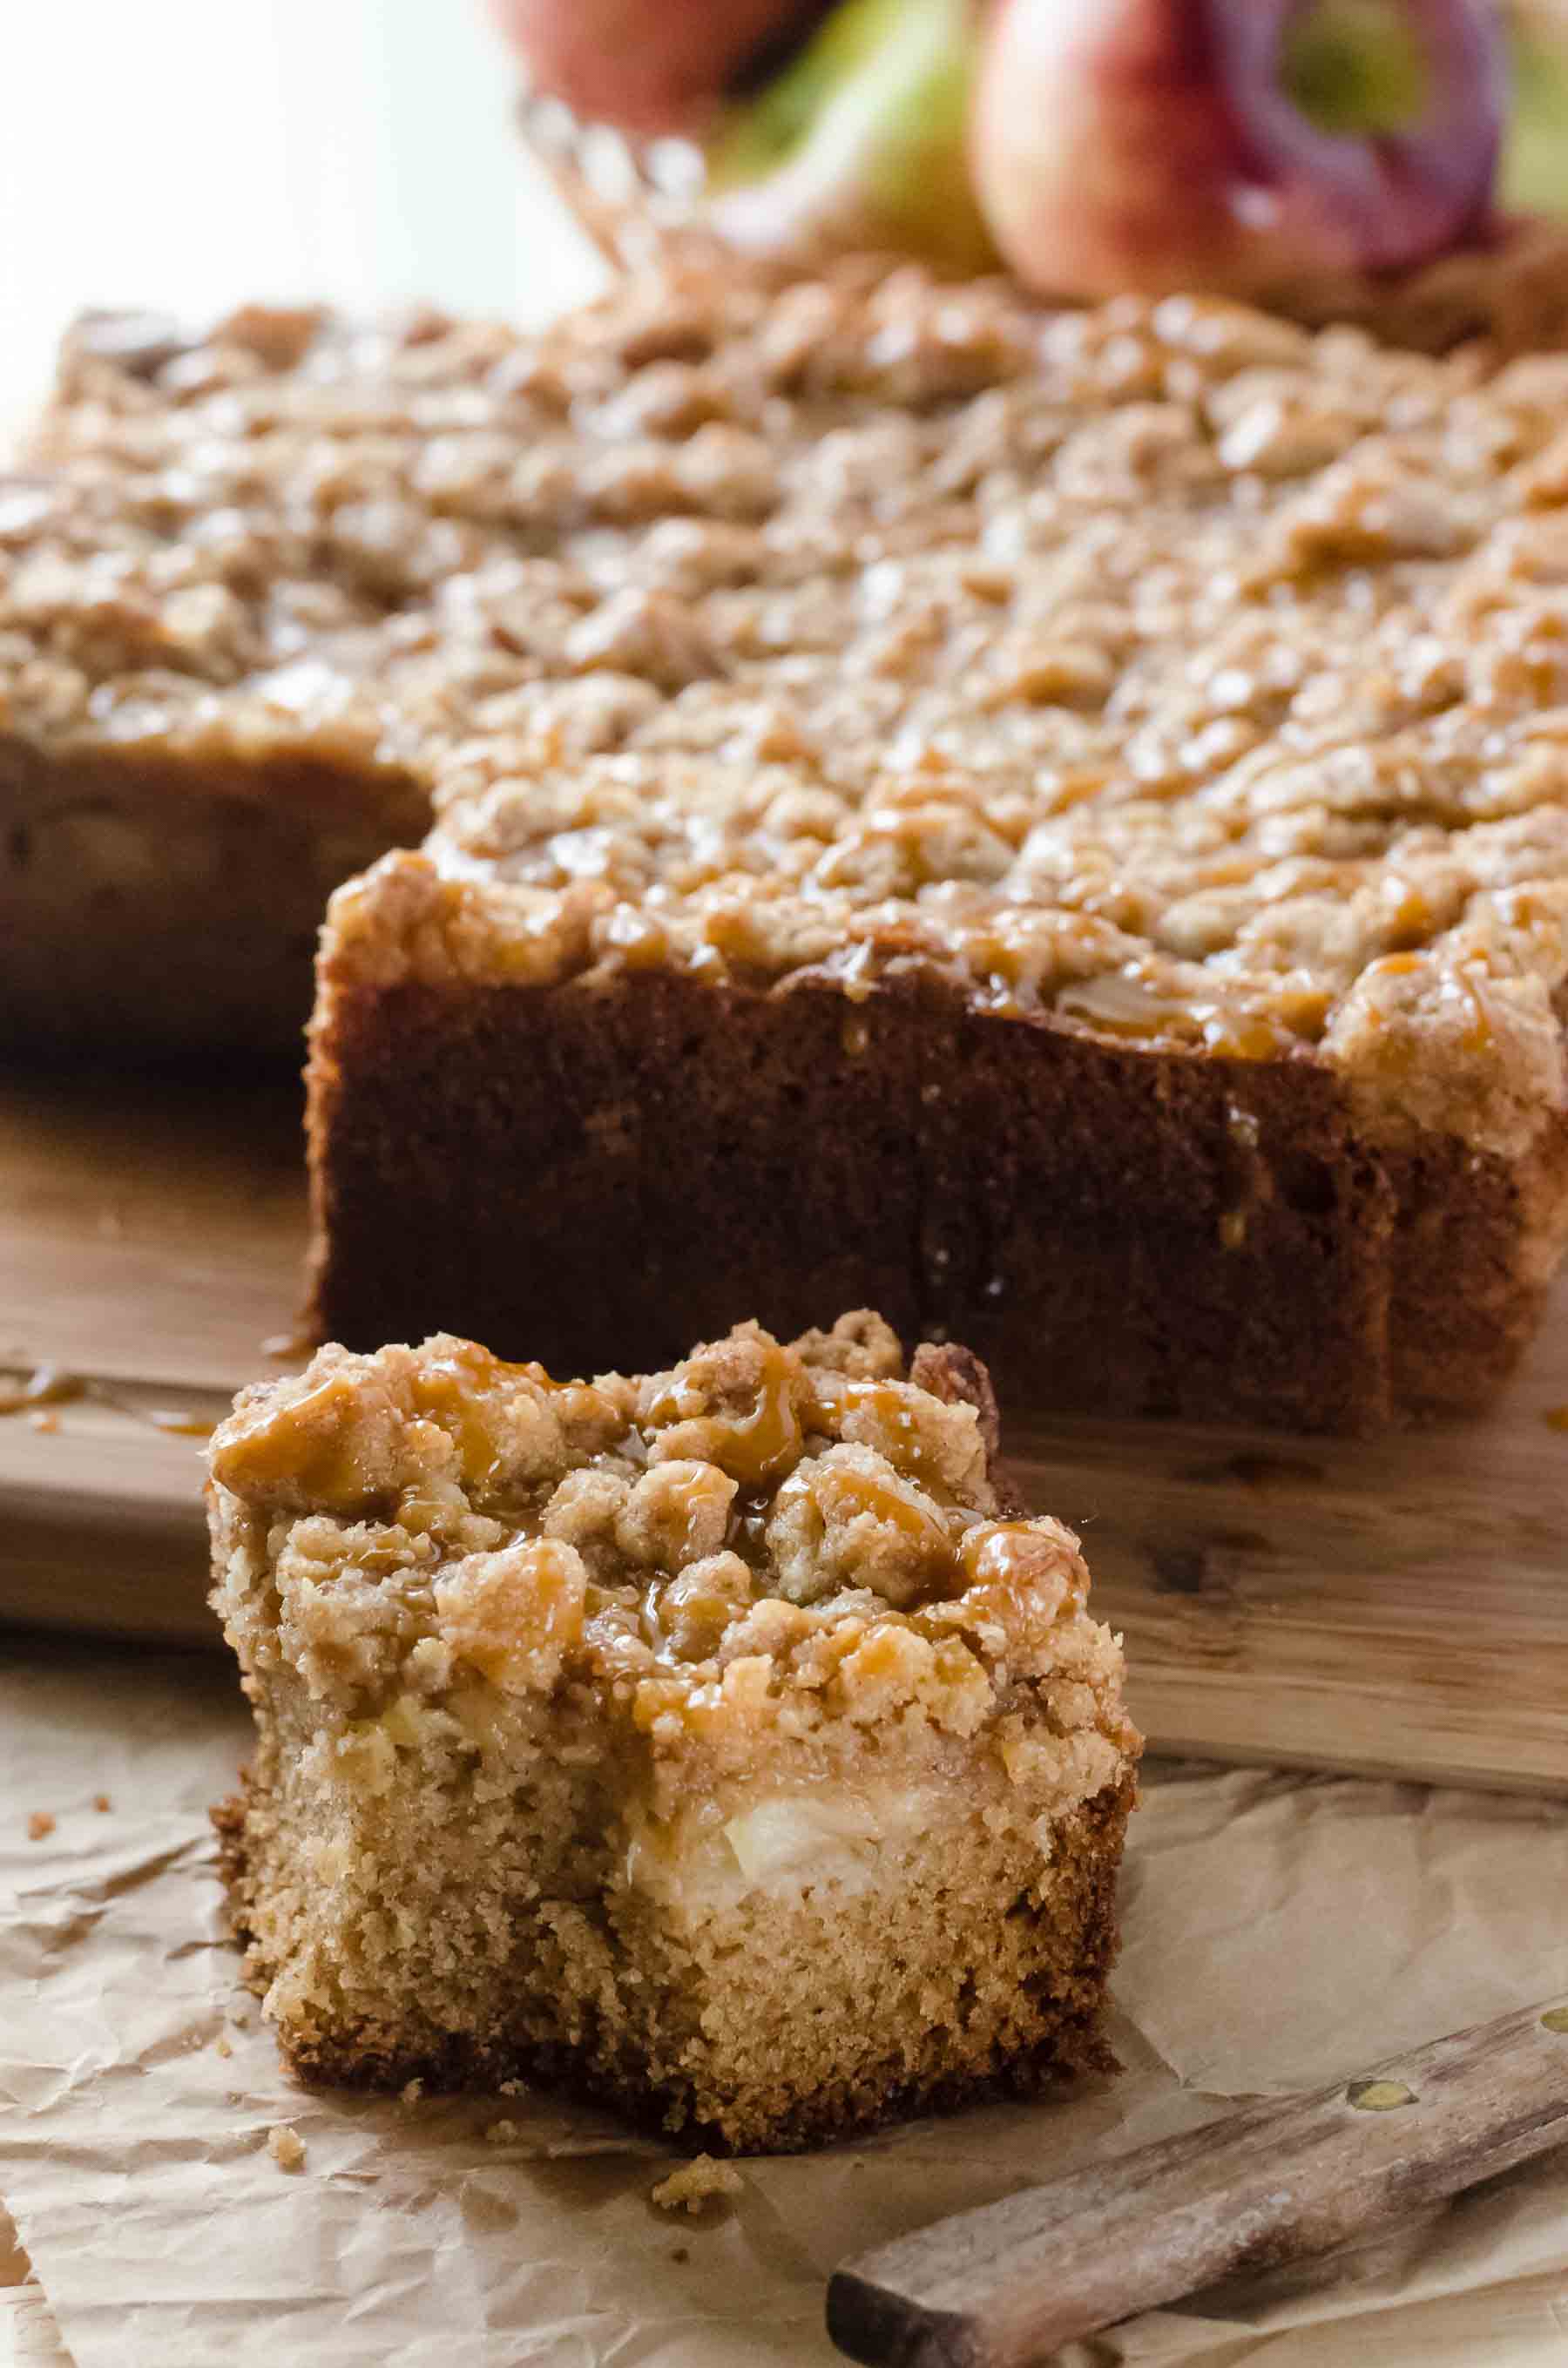 Classic crumb cake with an autumn twist! This sweet Apple Butterscotch Crumb Cake is loaded with apples, then drizzled with homemade butterscotch sauce that you're going to want to put on everything!